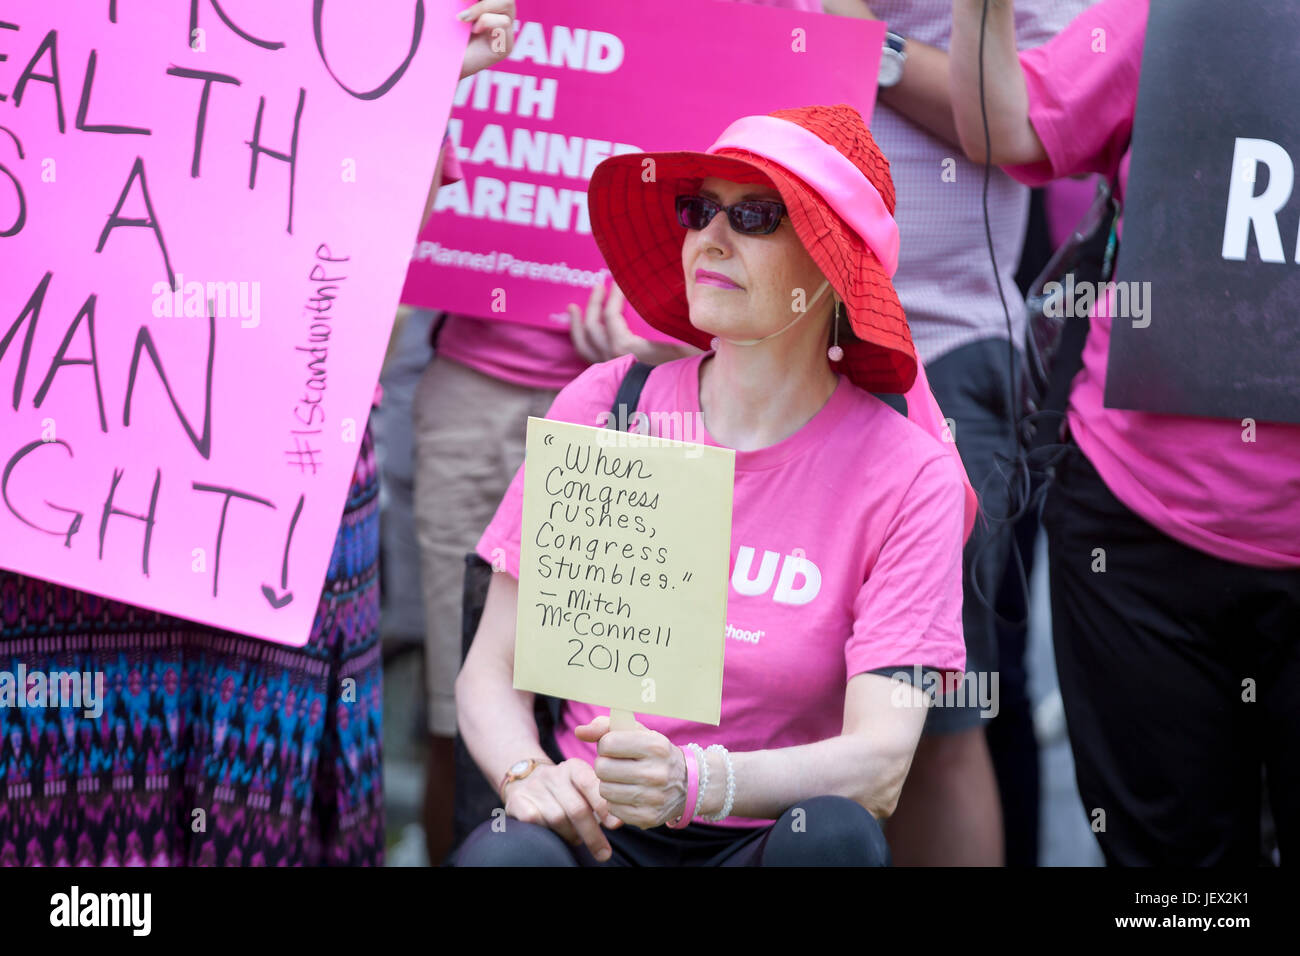 Washington, DC, USA. 27th June, 2017. Planned Parenthood supporters protest in front of the US Capitol building. Stock Photo